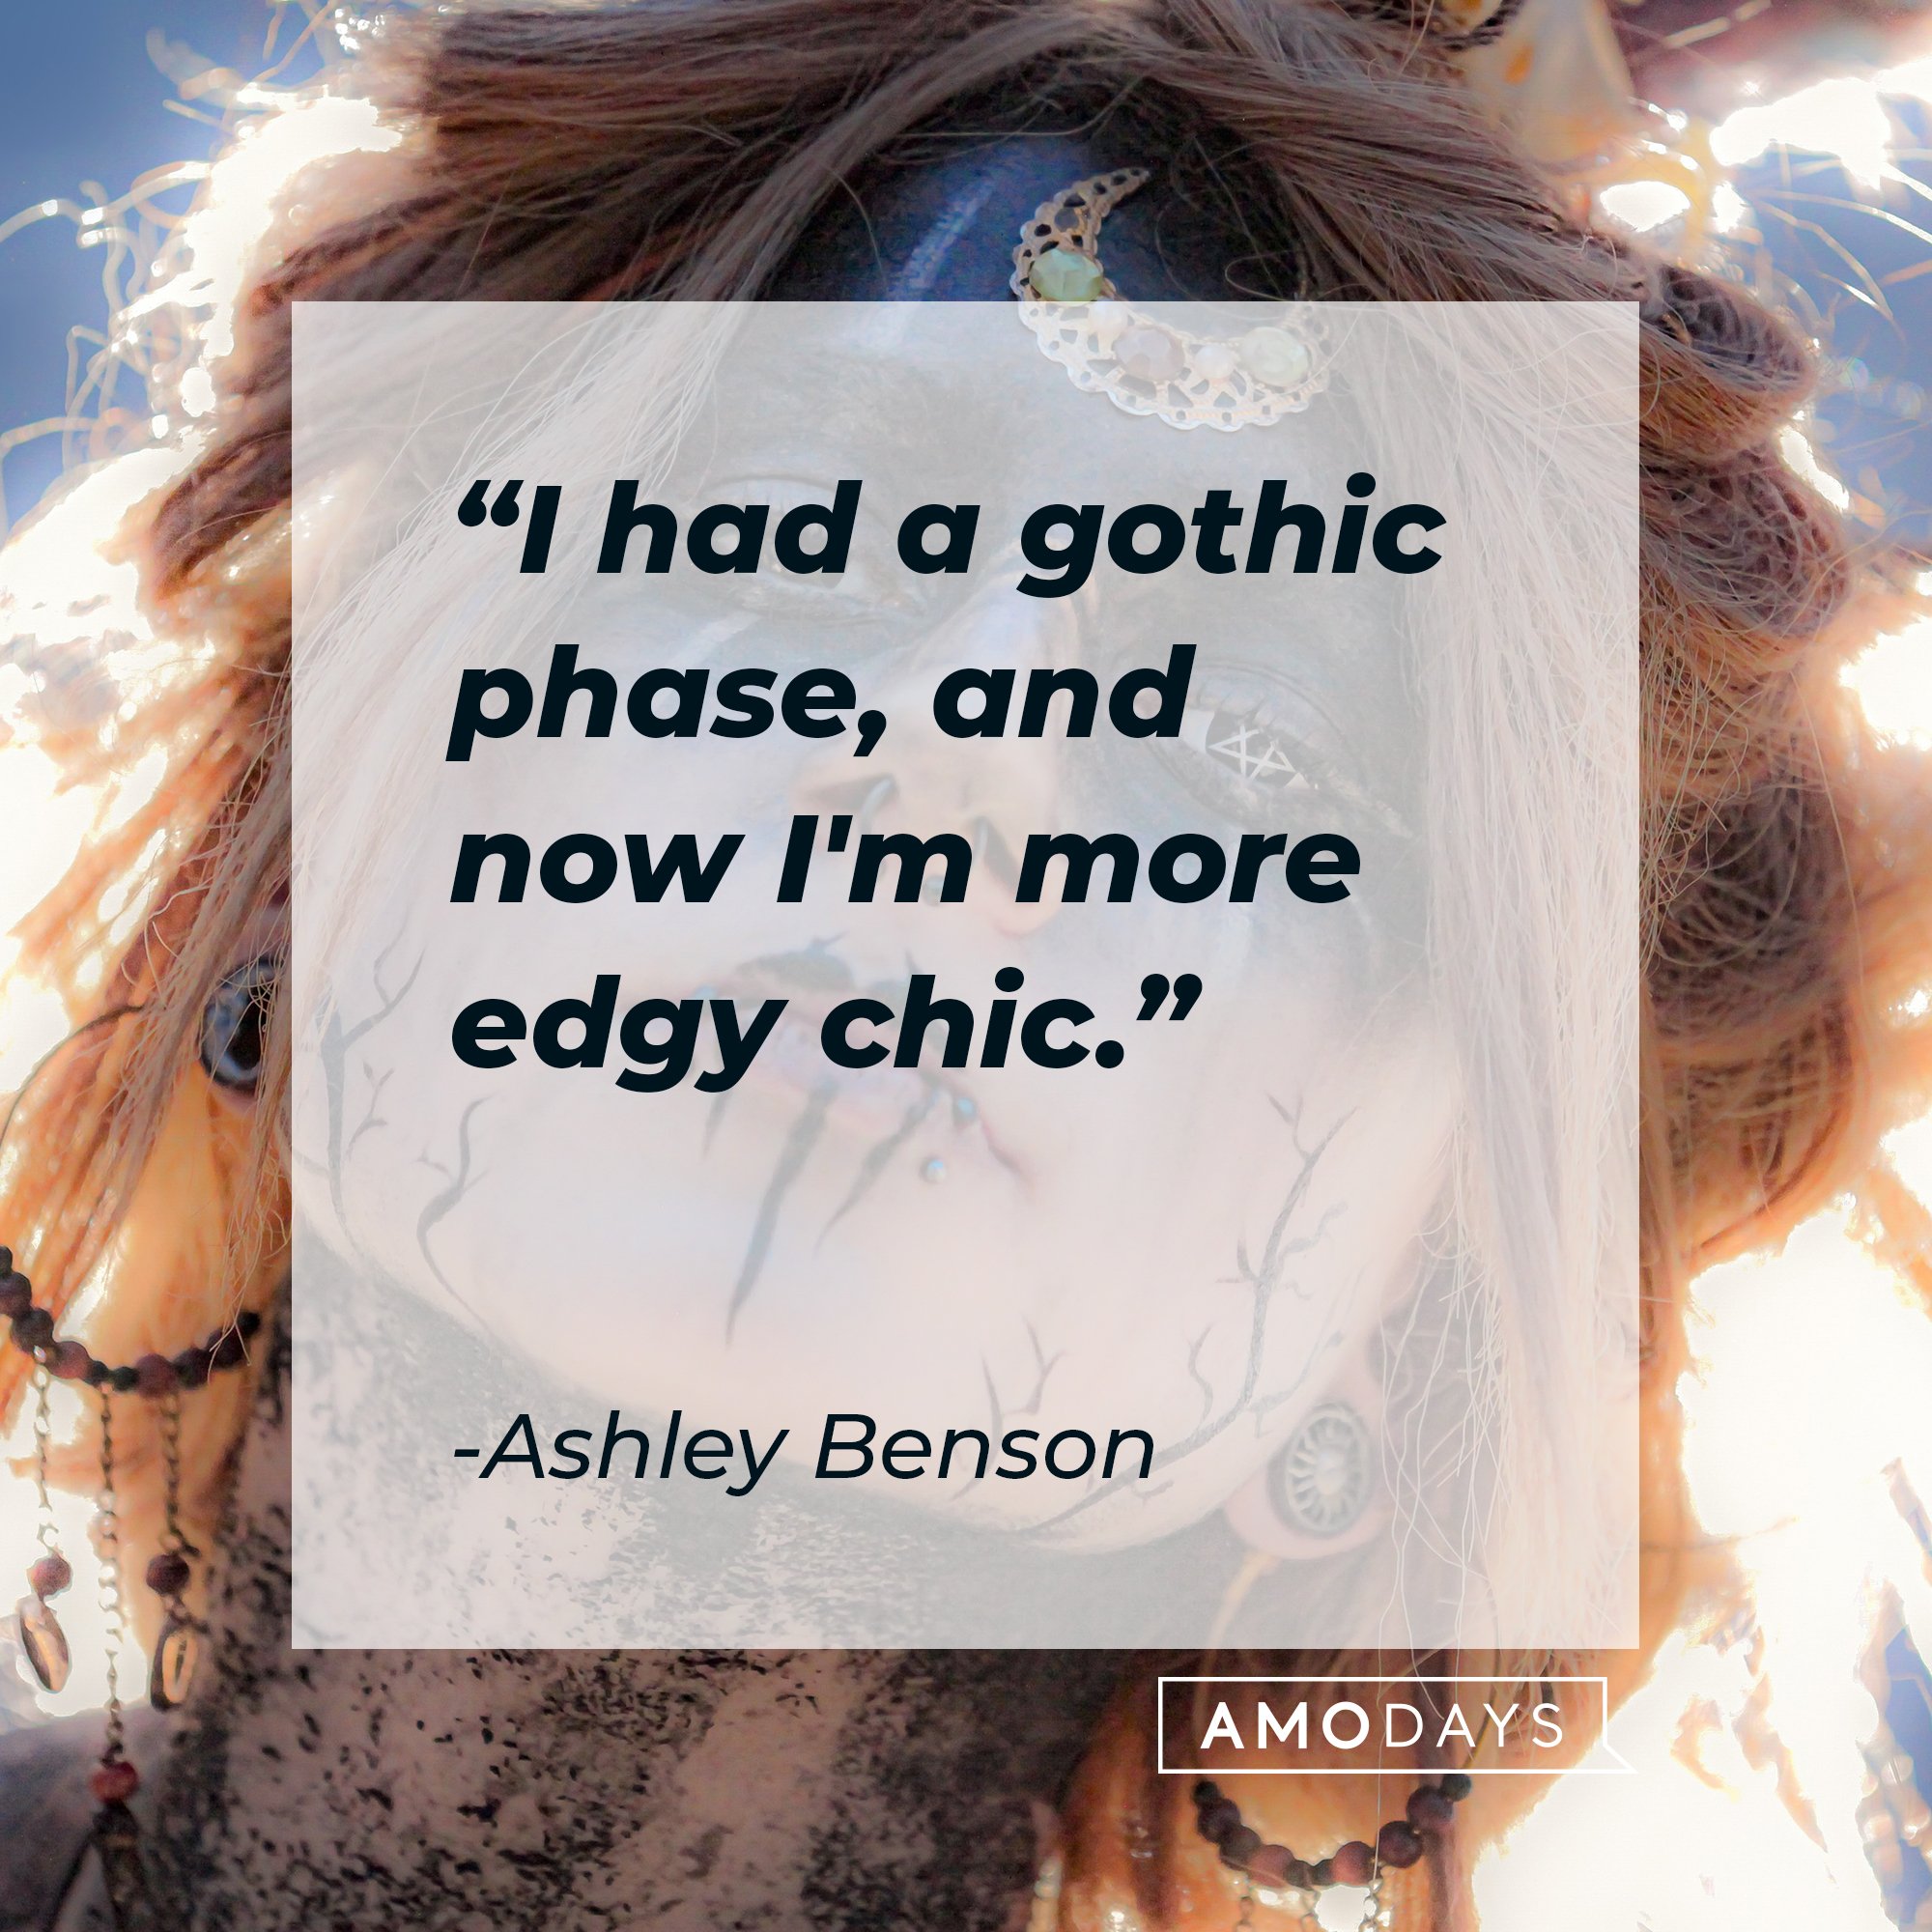 Ashley Benson's quote: "I had a gothic phase, and now I'm more edgy chic.” | Image: AmoDays